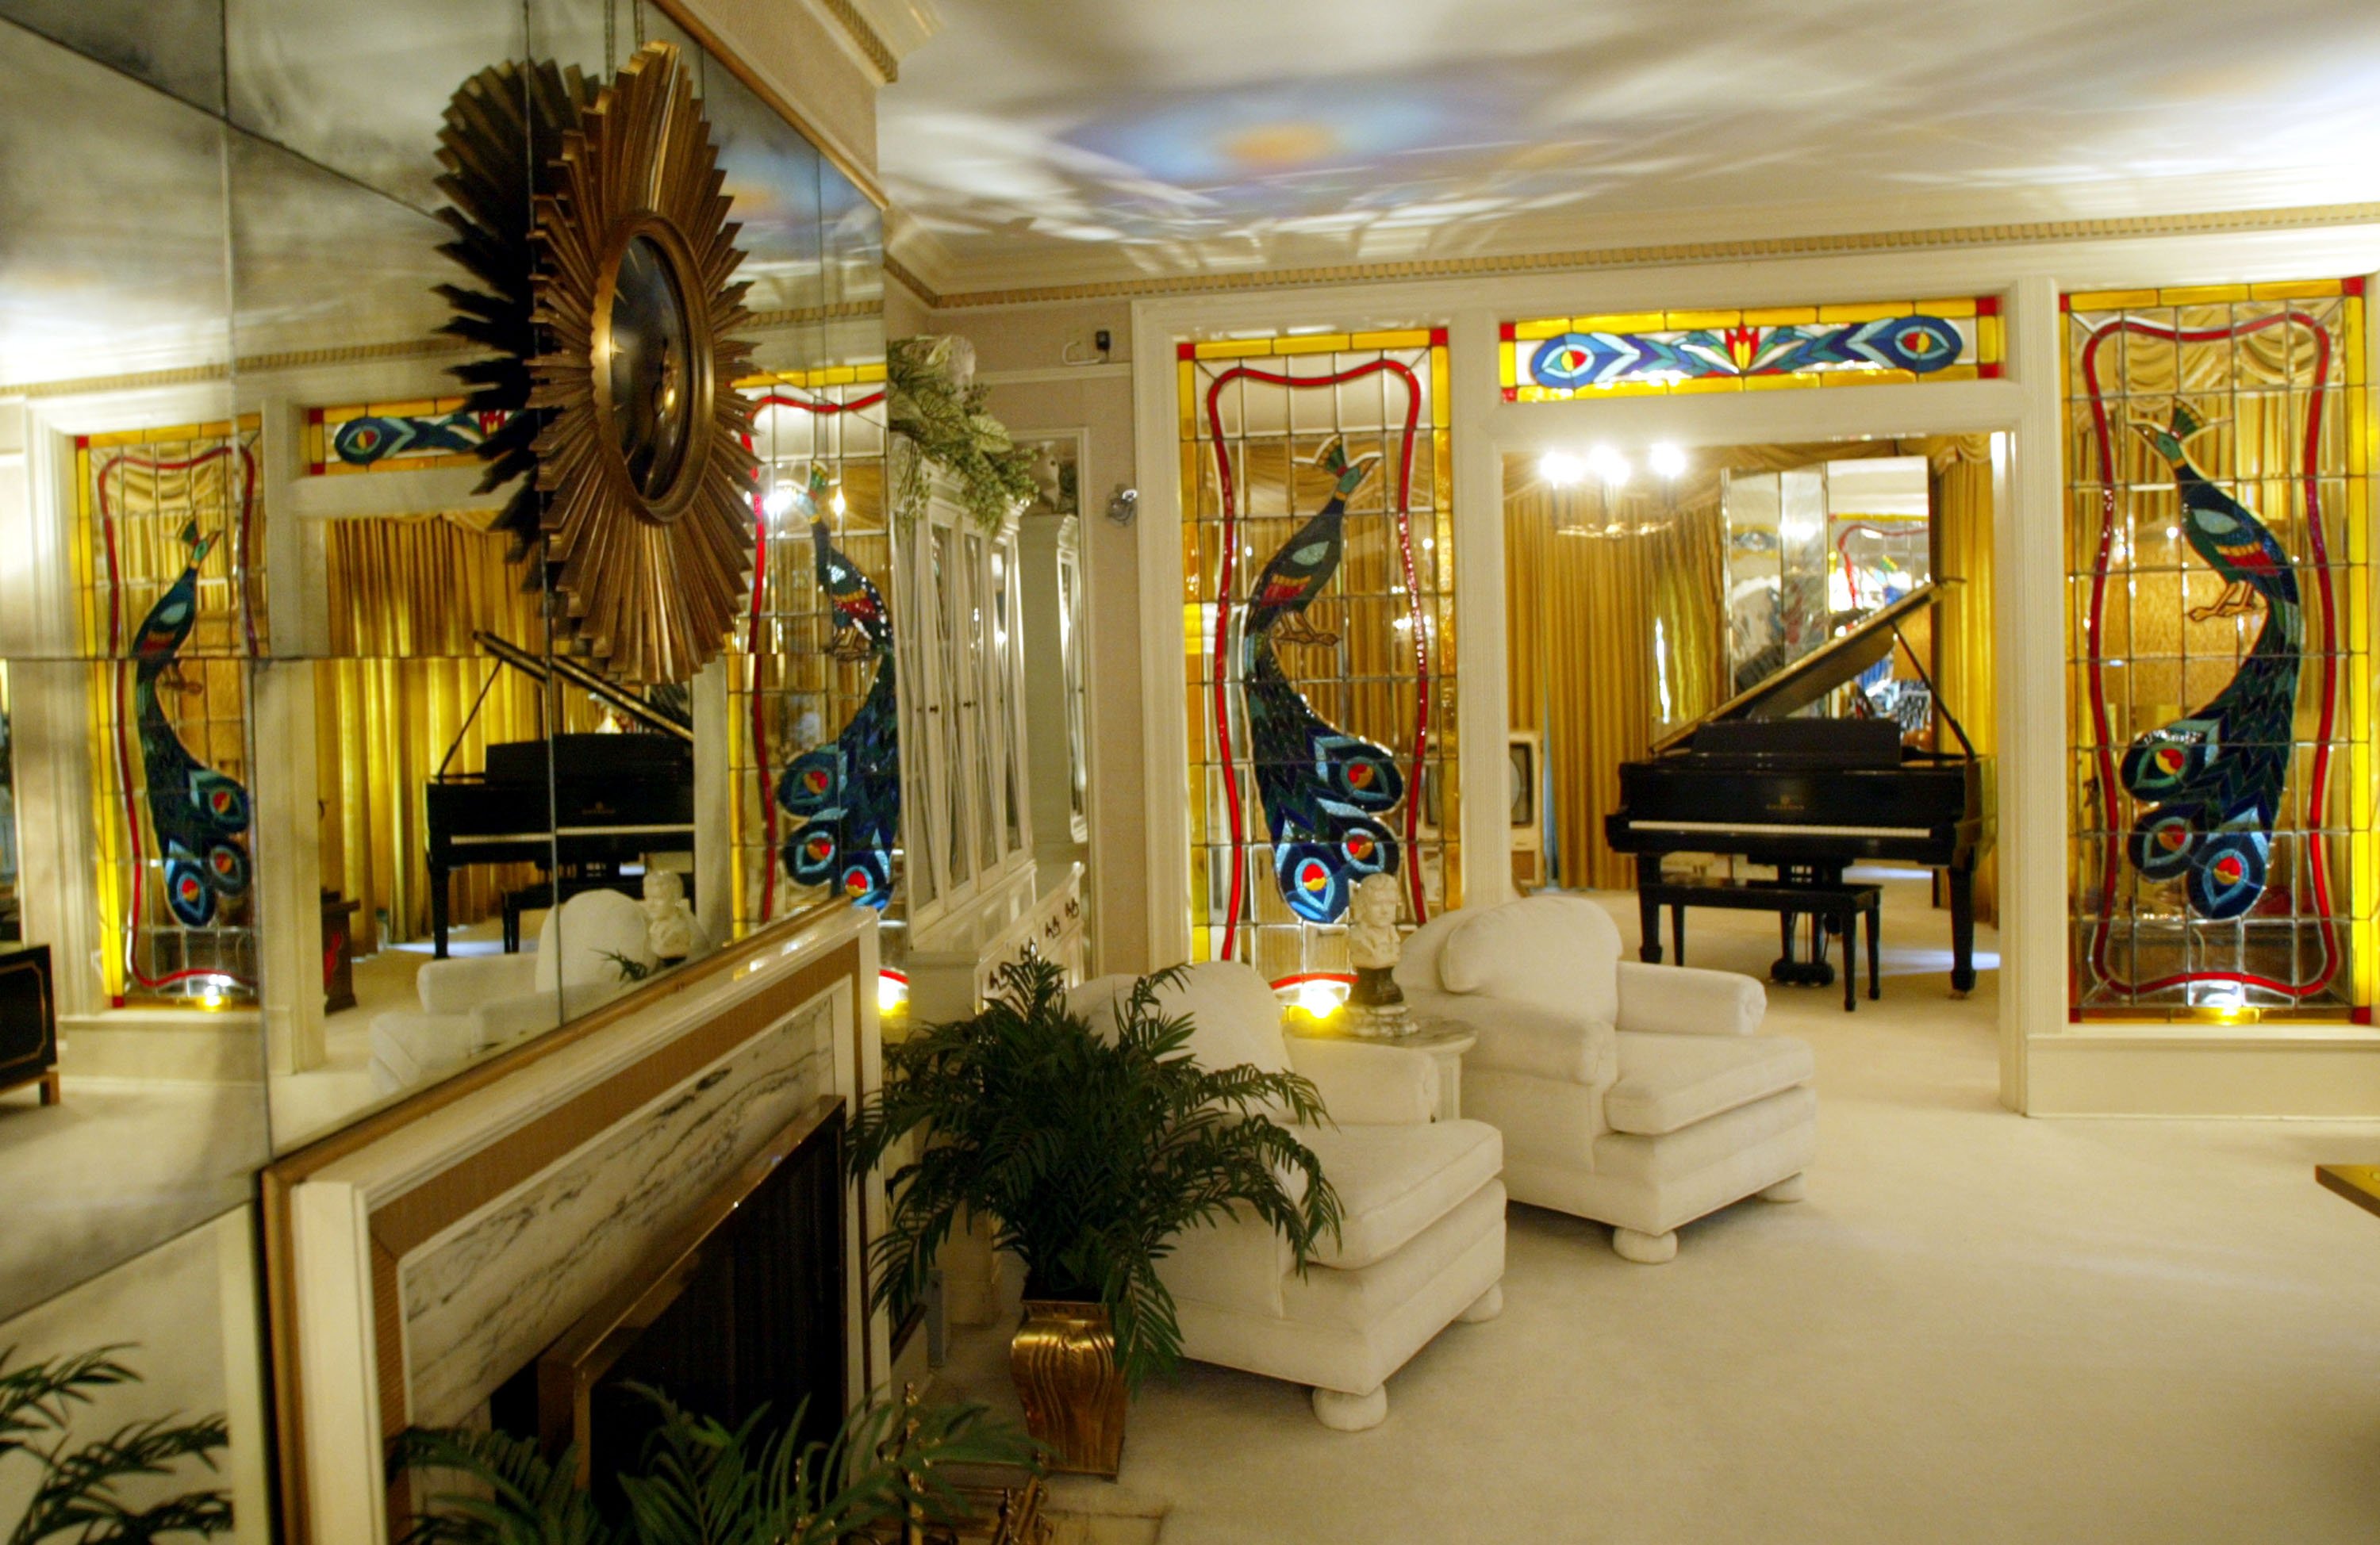 The fireplace at Graceland